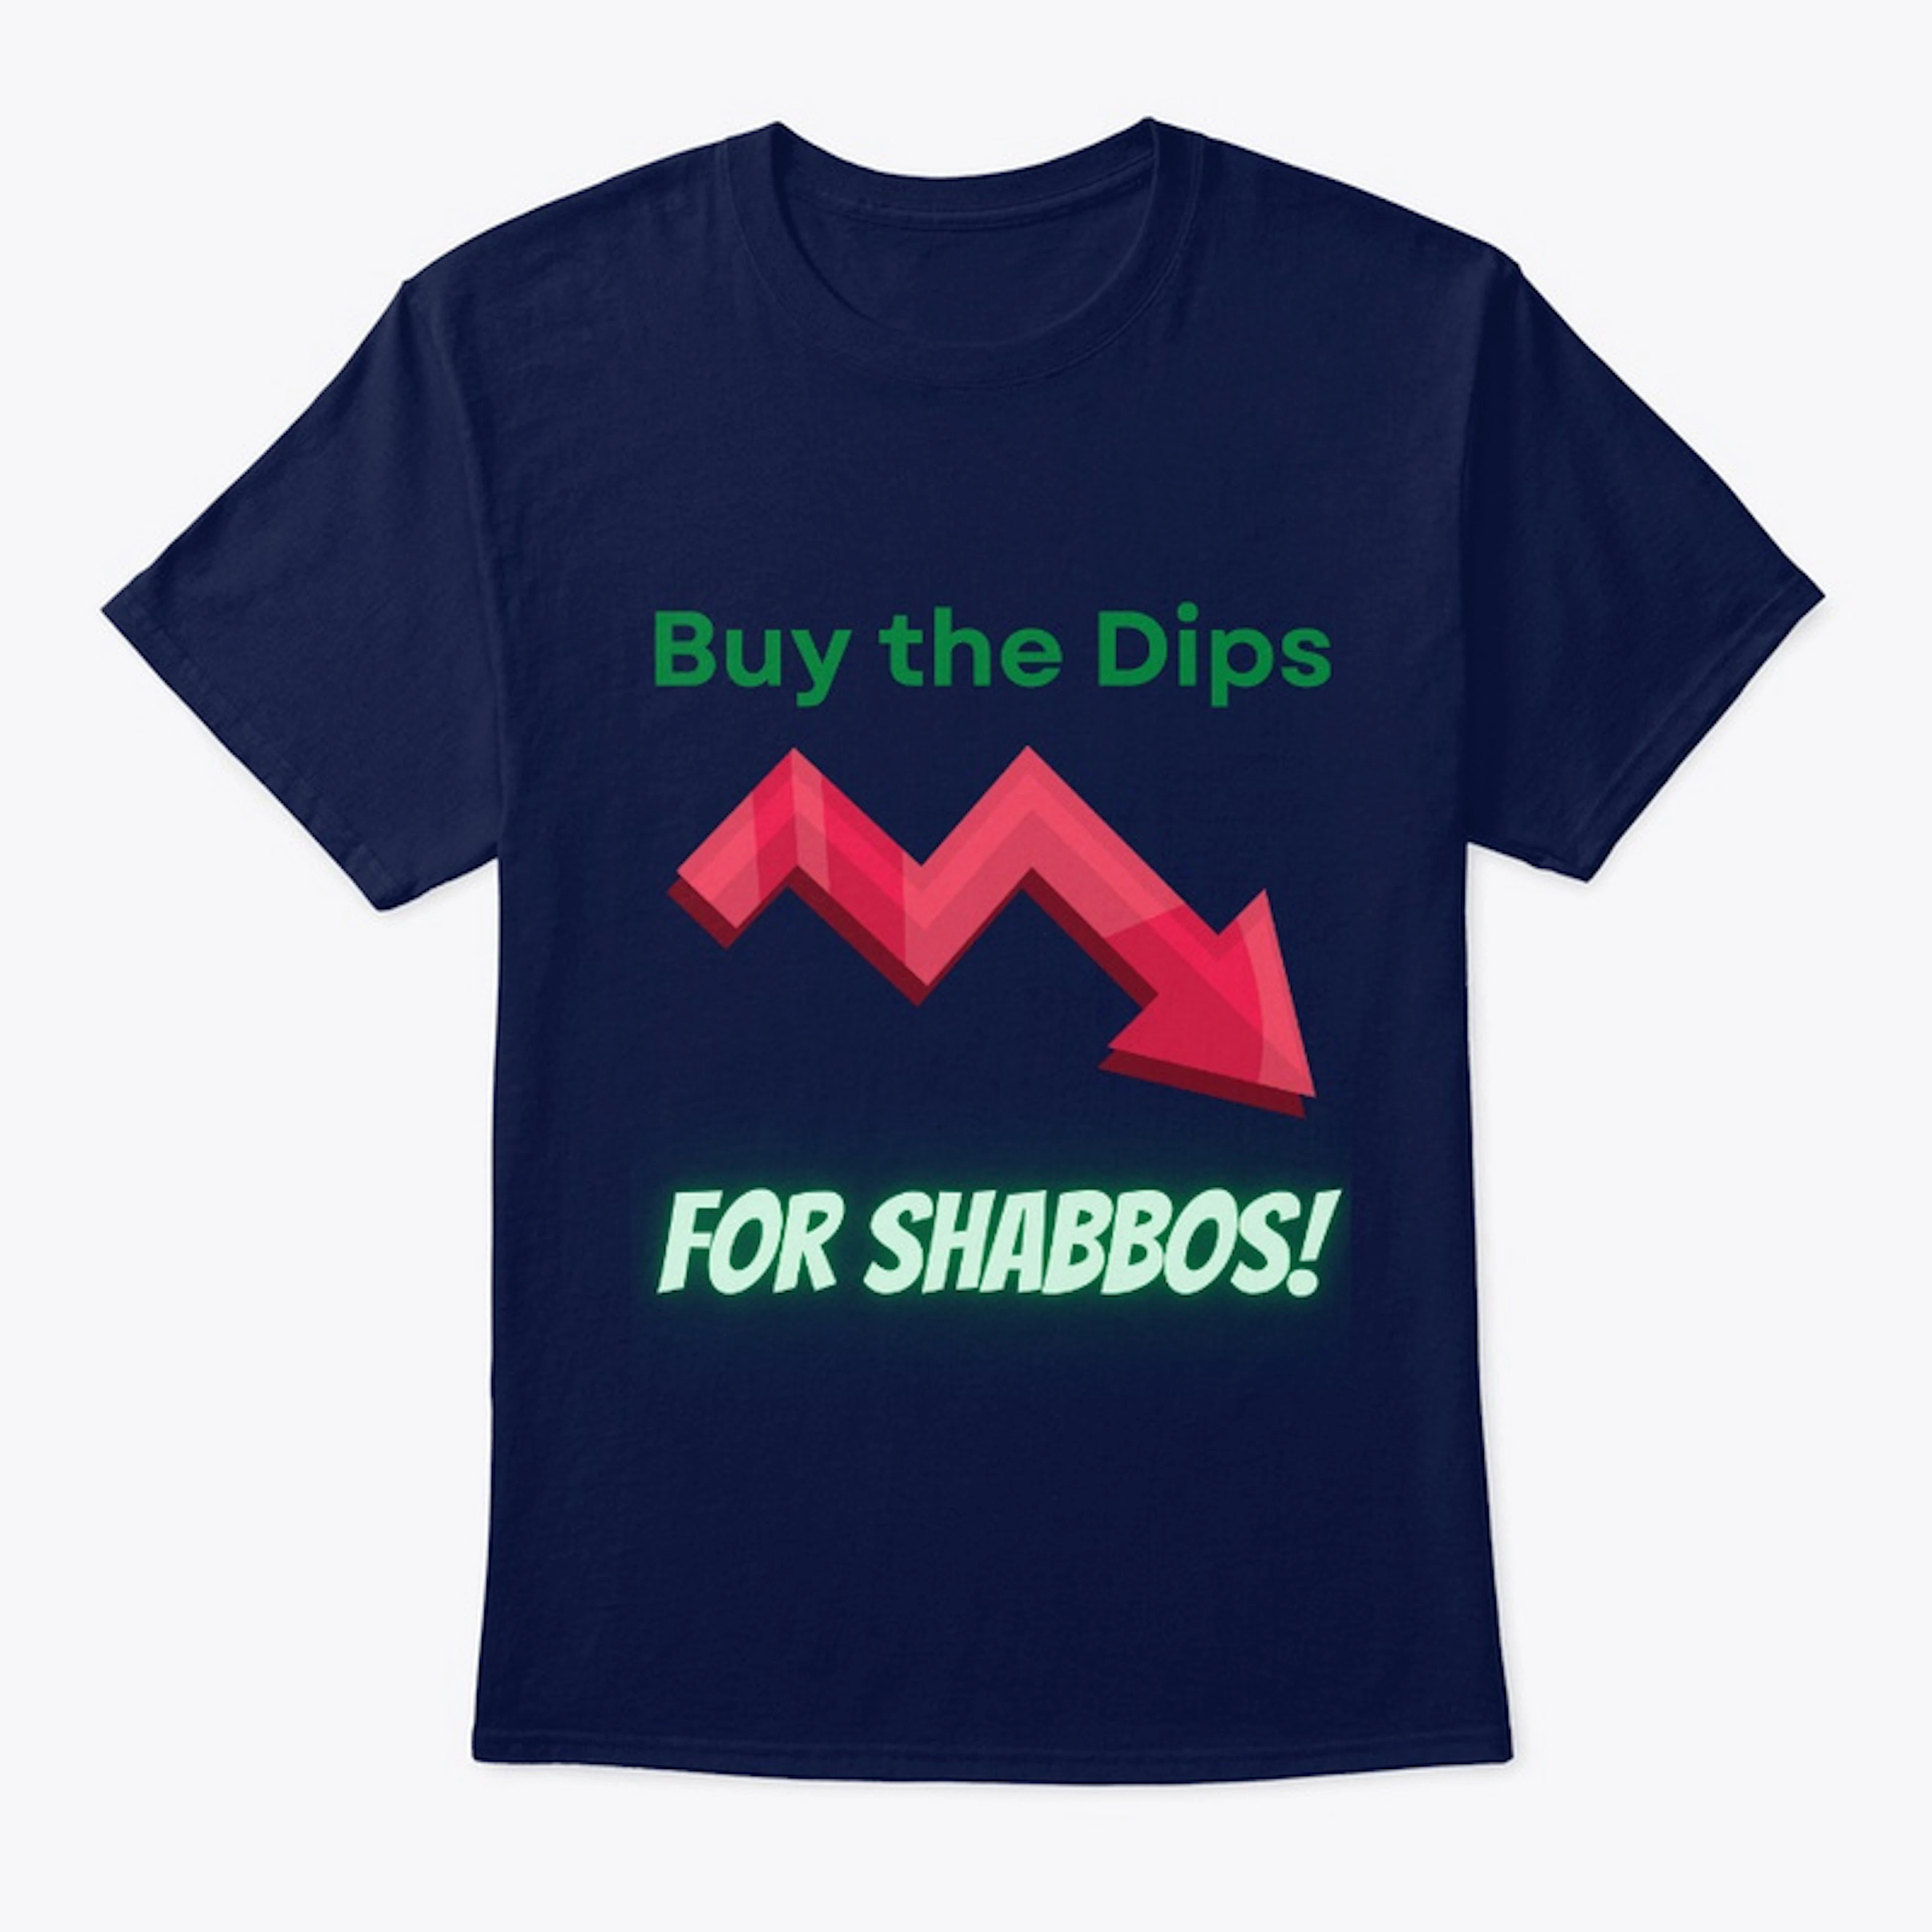 Buy the Shabbos Dips